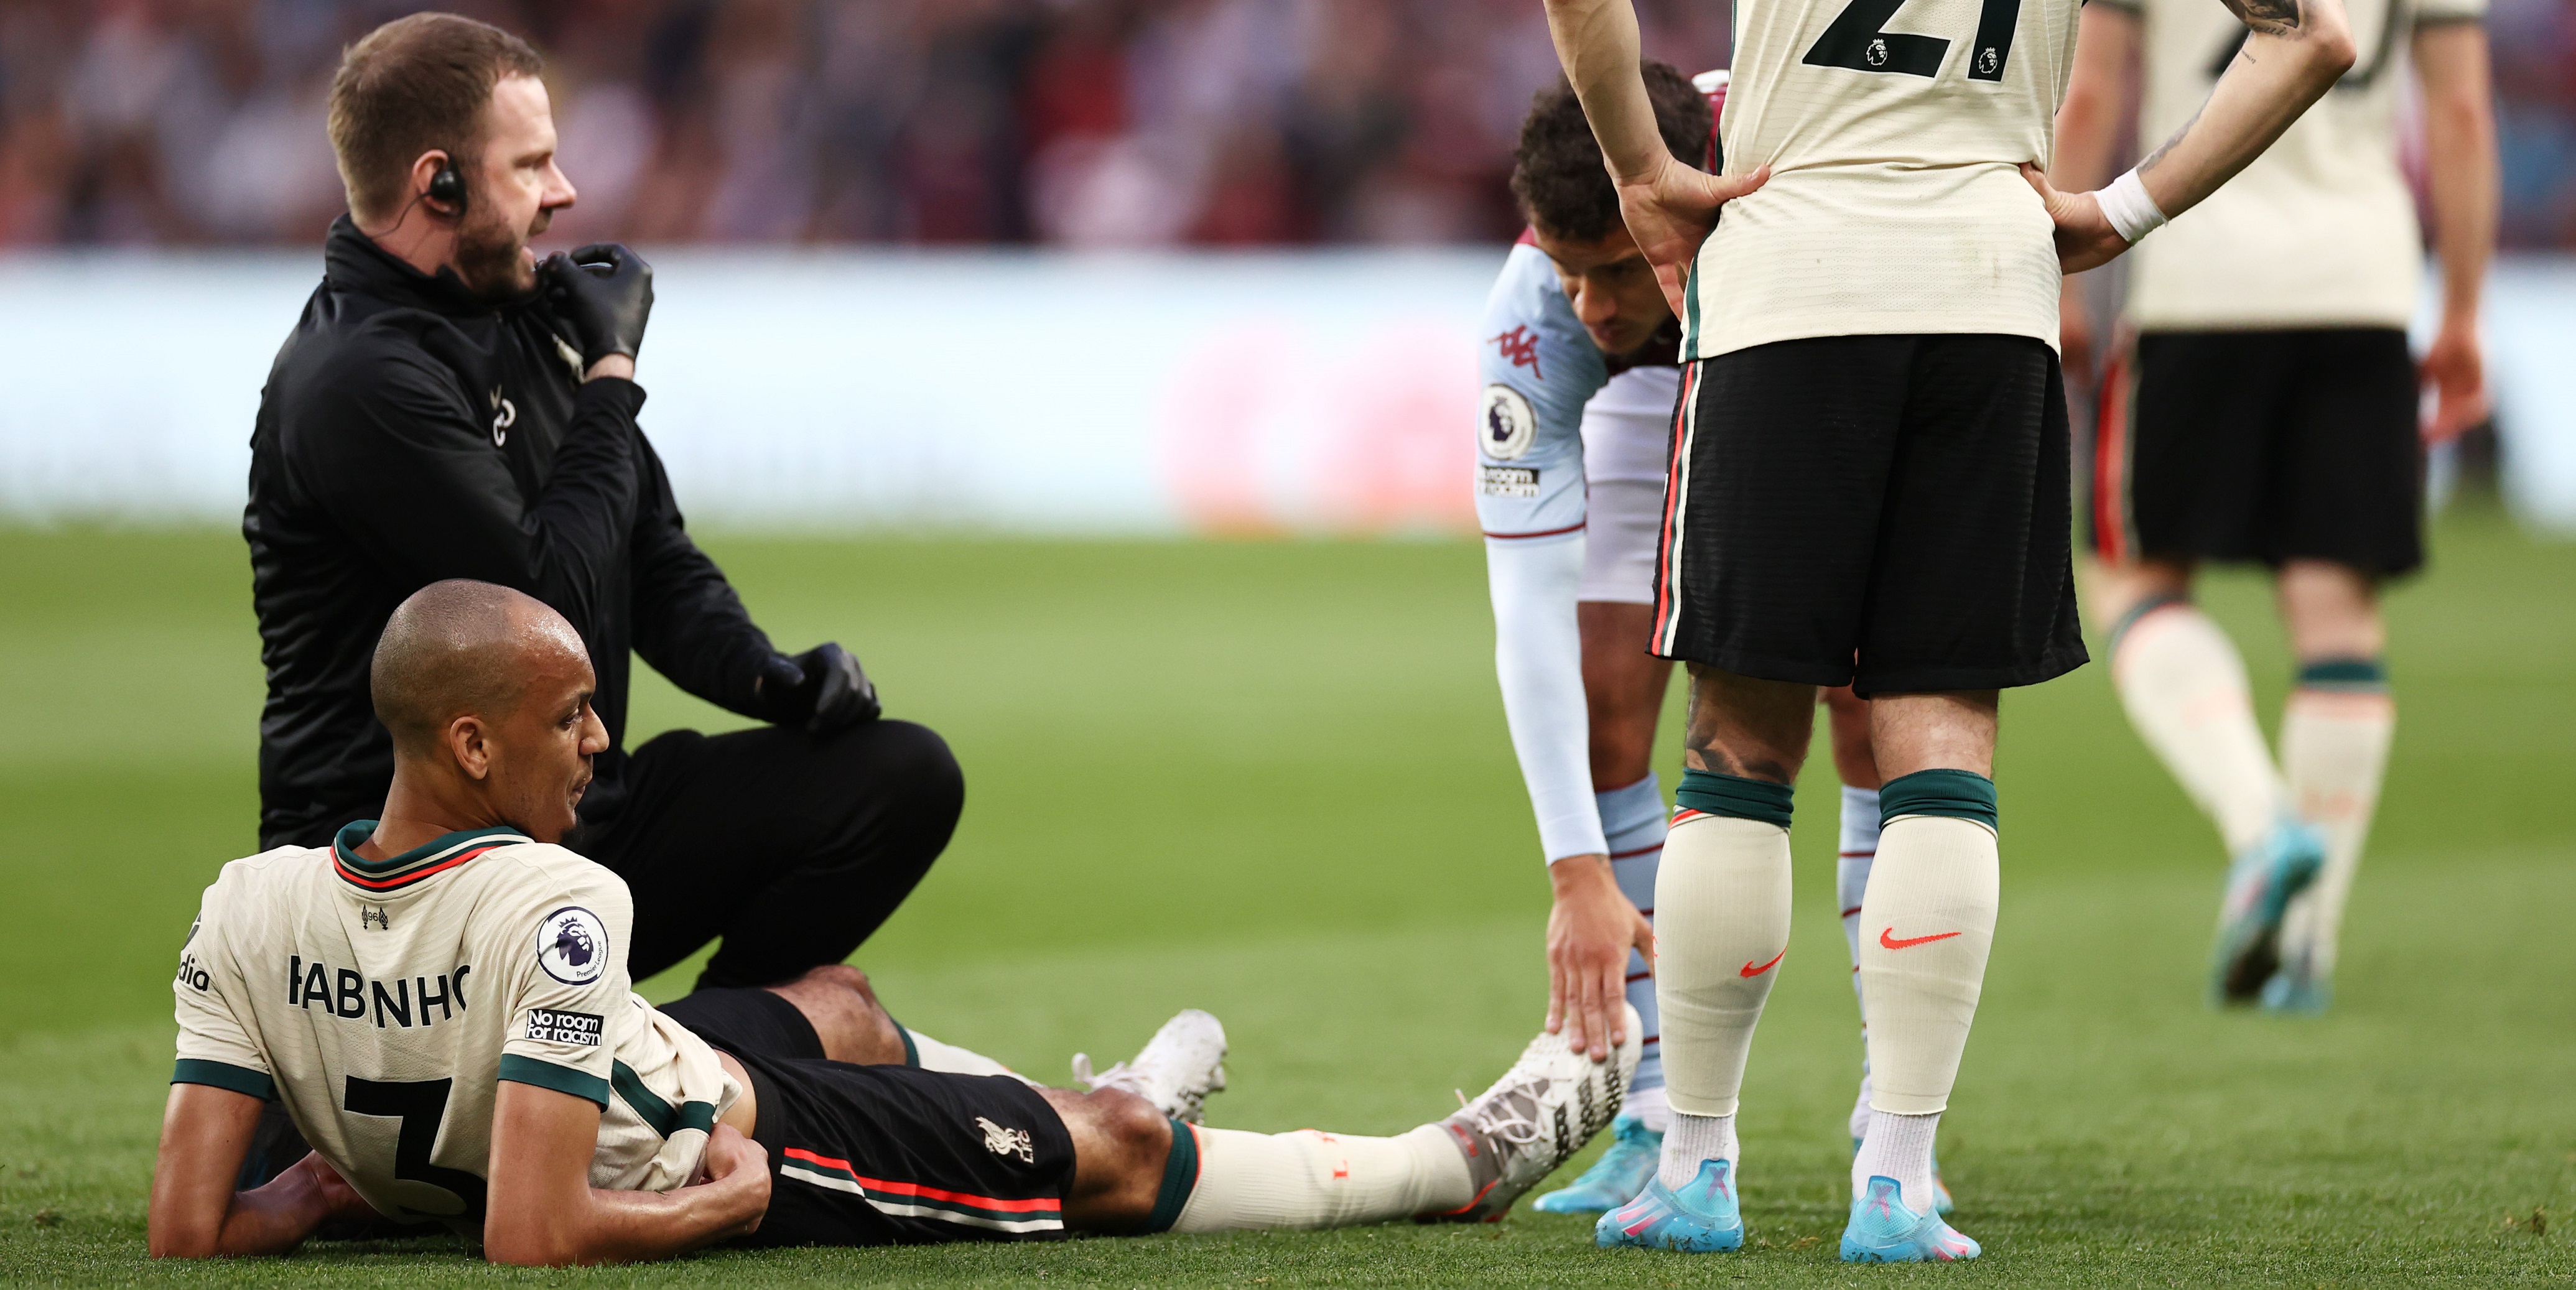 Fabinho limps off during Villa clash to hand Liverpool huge injury concern ahead of FA Cup final